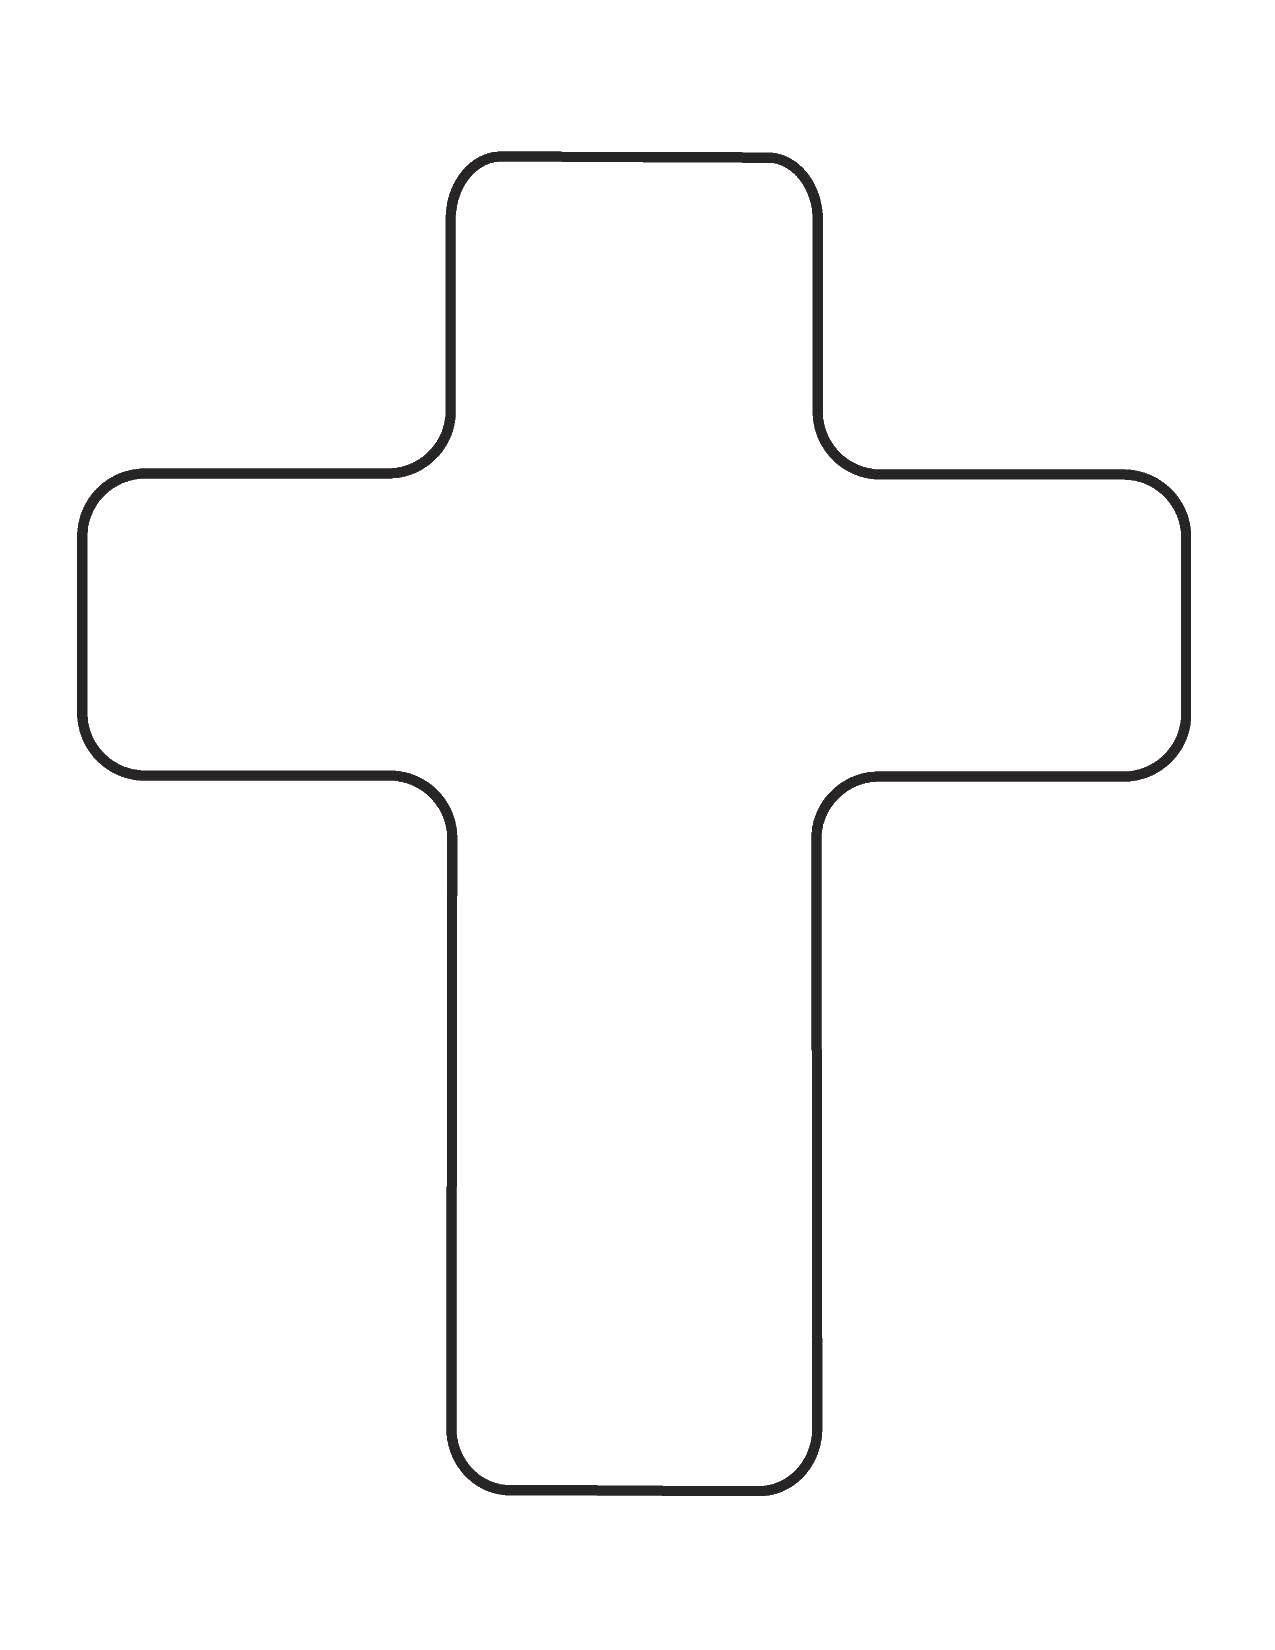 Coloring Simple cross. Category coloring pages cross. Tags:  cross.